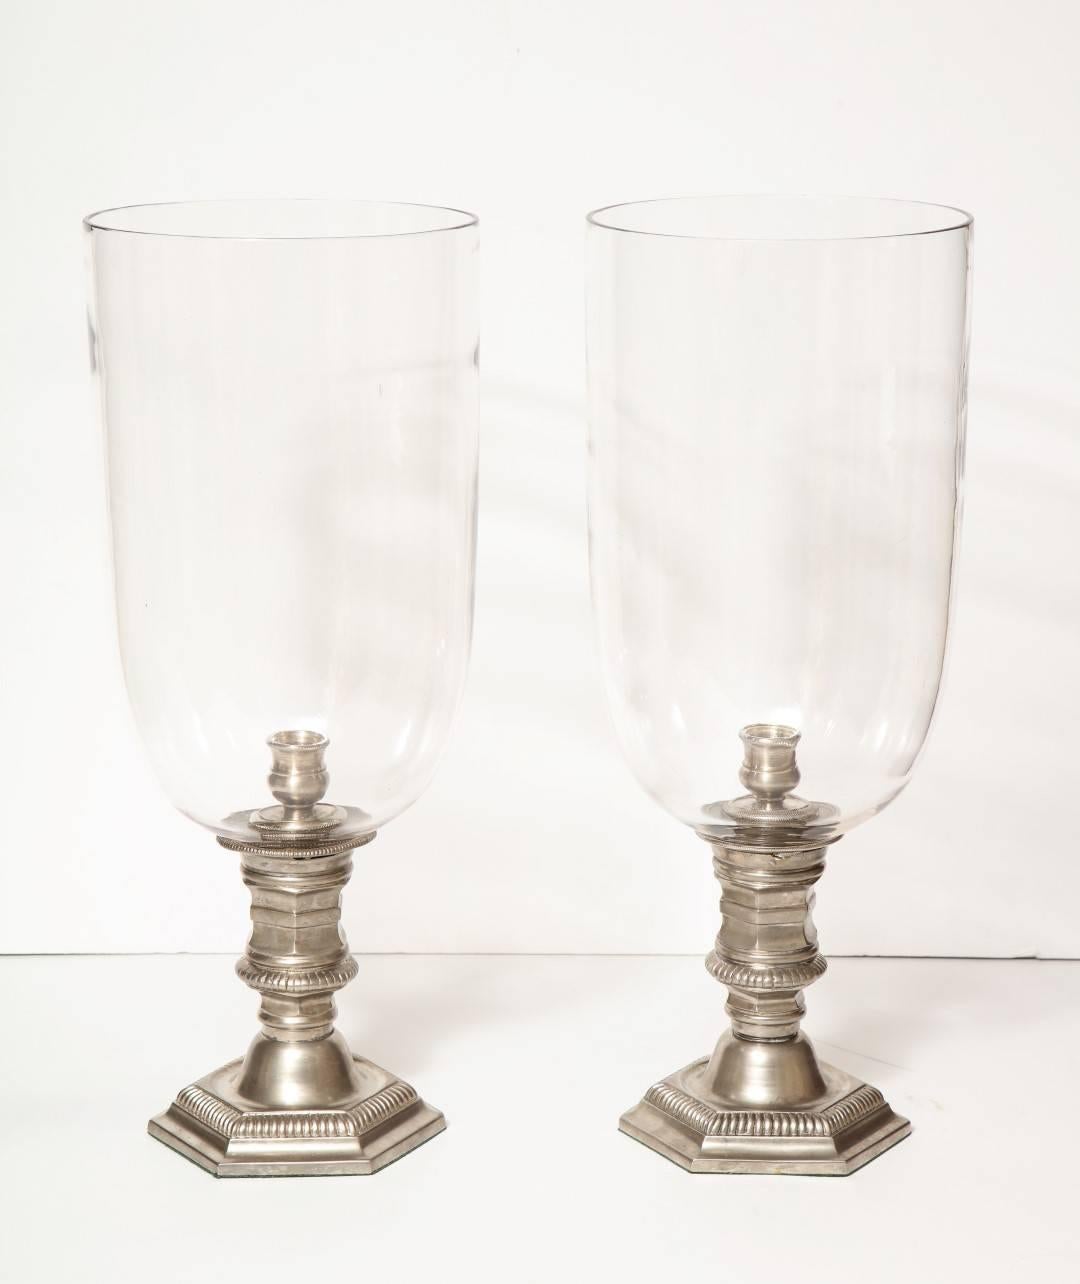 Early 20th Century Pair of Silver Plated Hurricane Candleholders